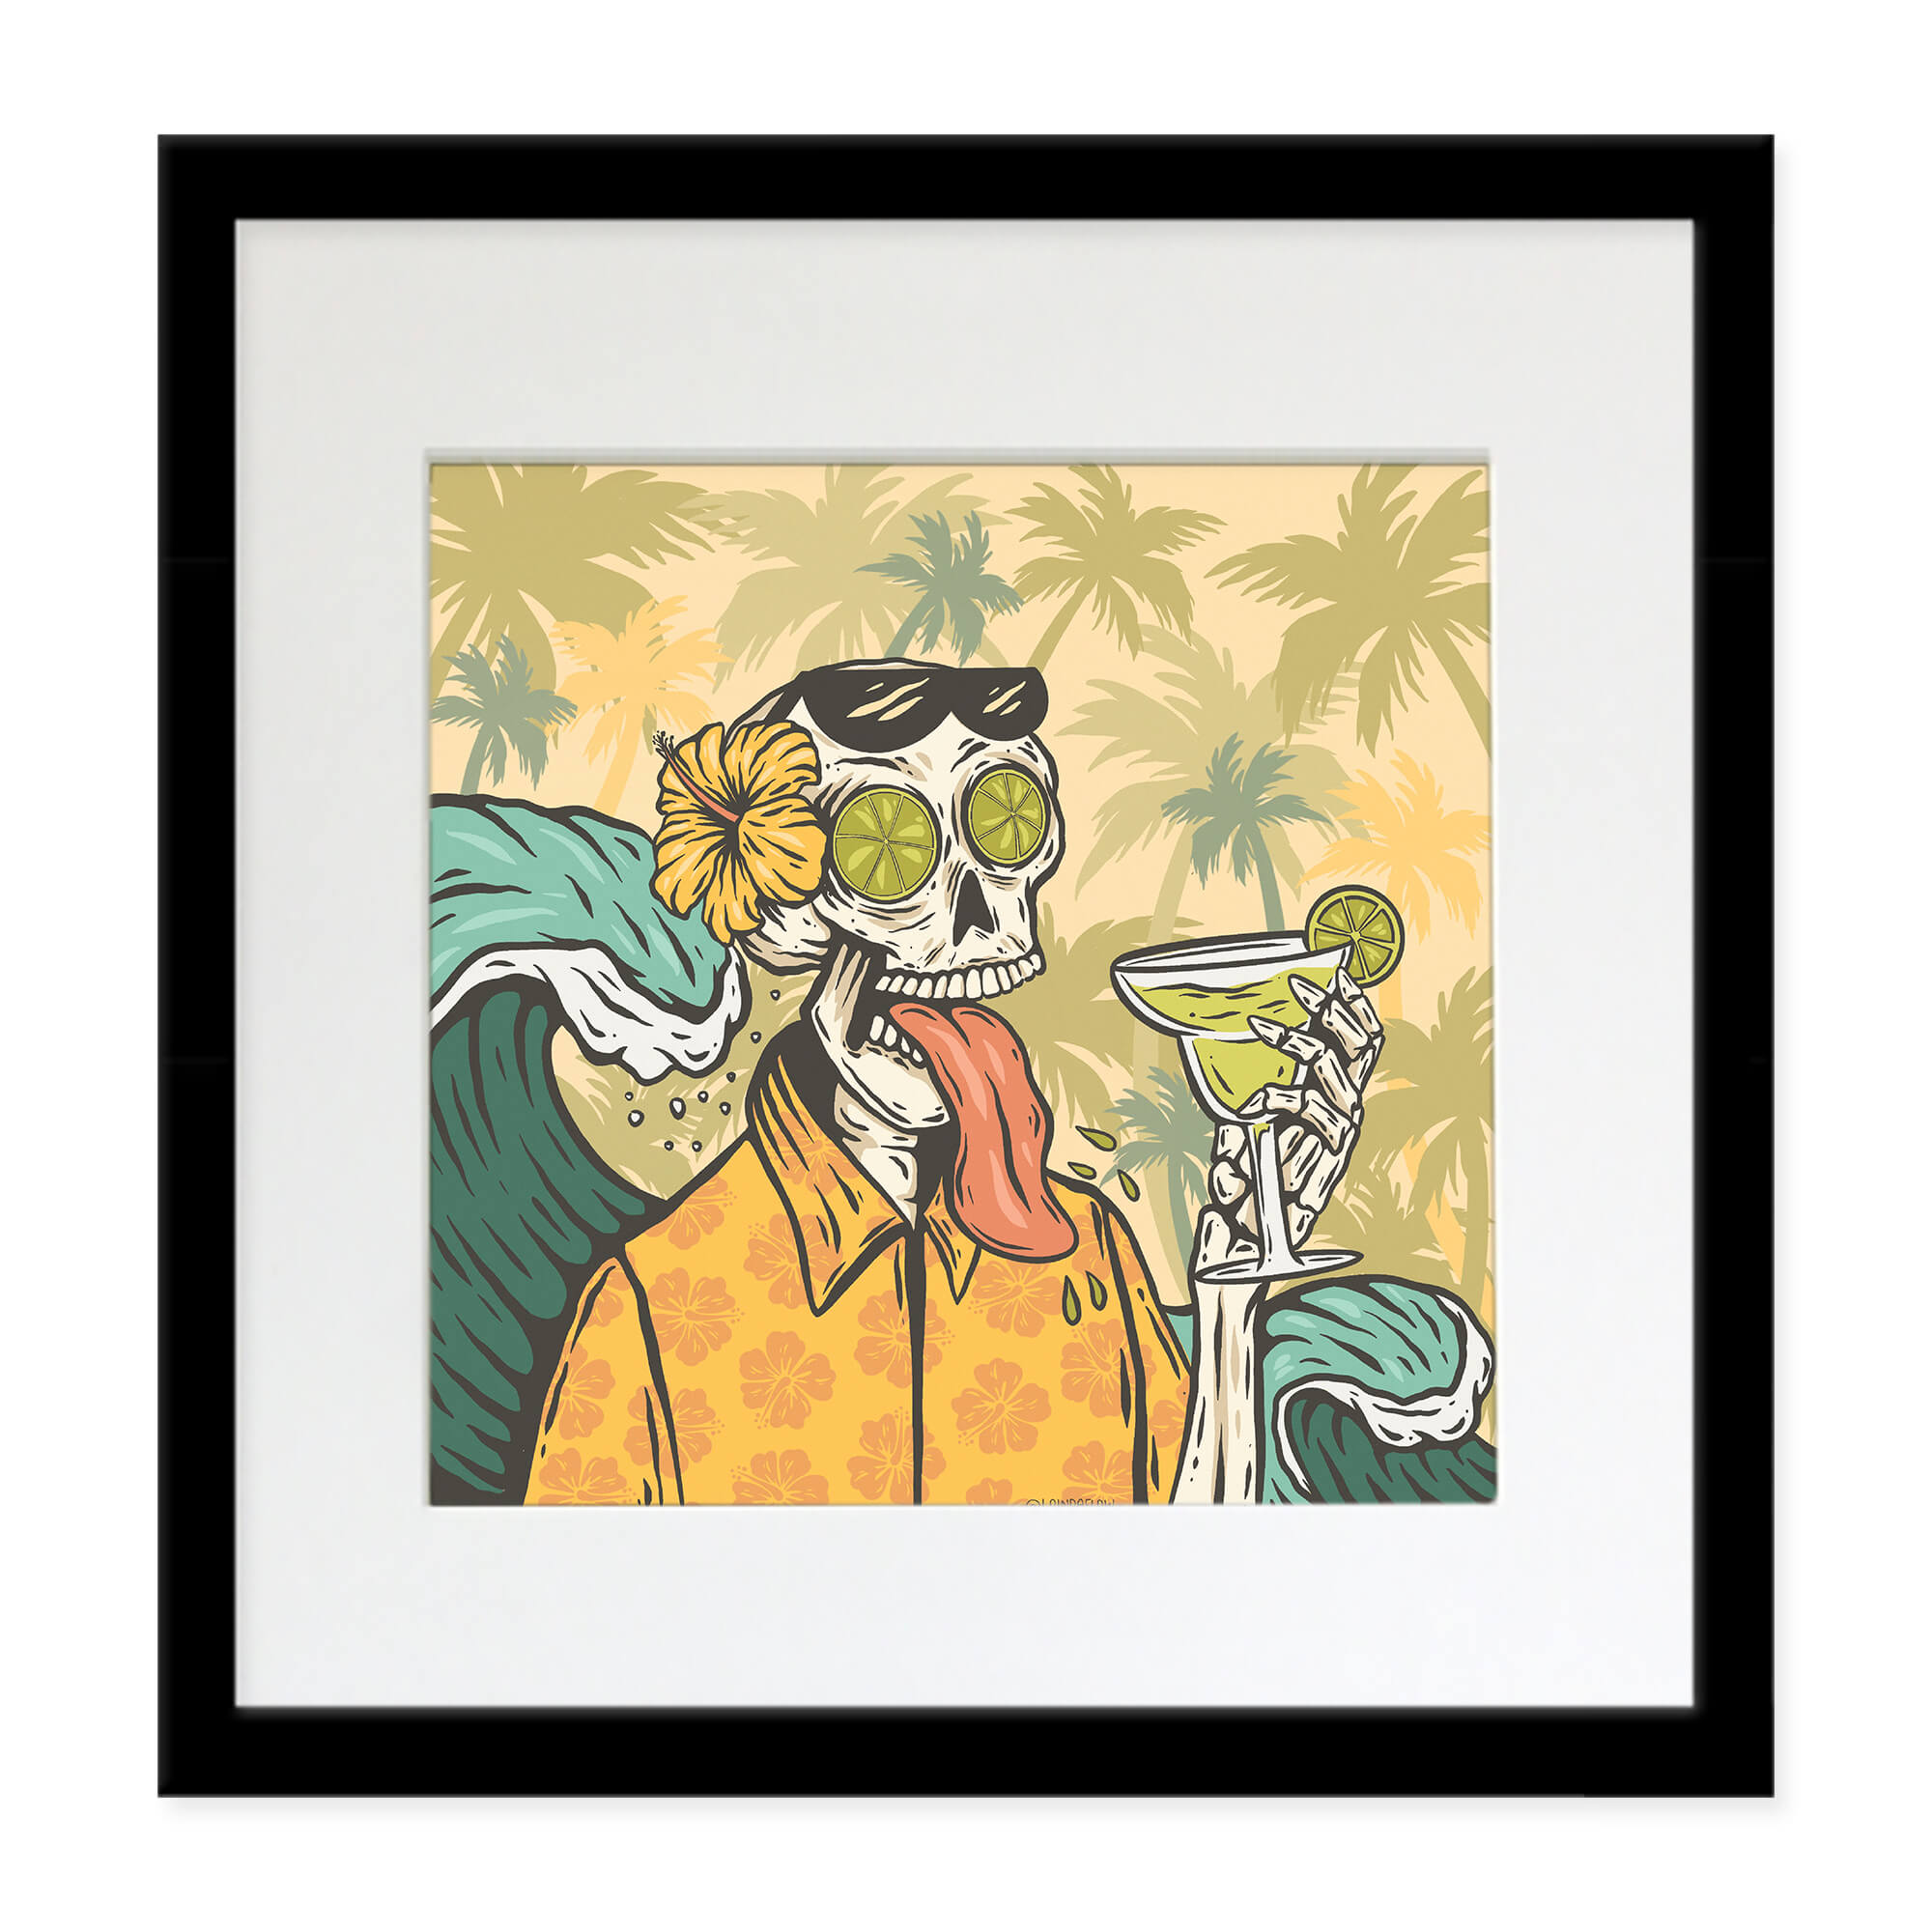 Matted art print with black frame featuring a skeleton man on a tropical island by Hawaii artist Laihha Organna